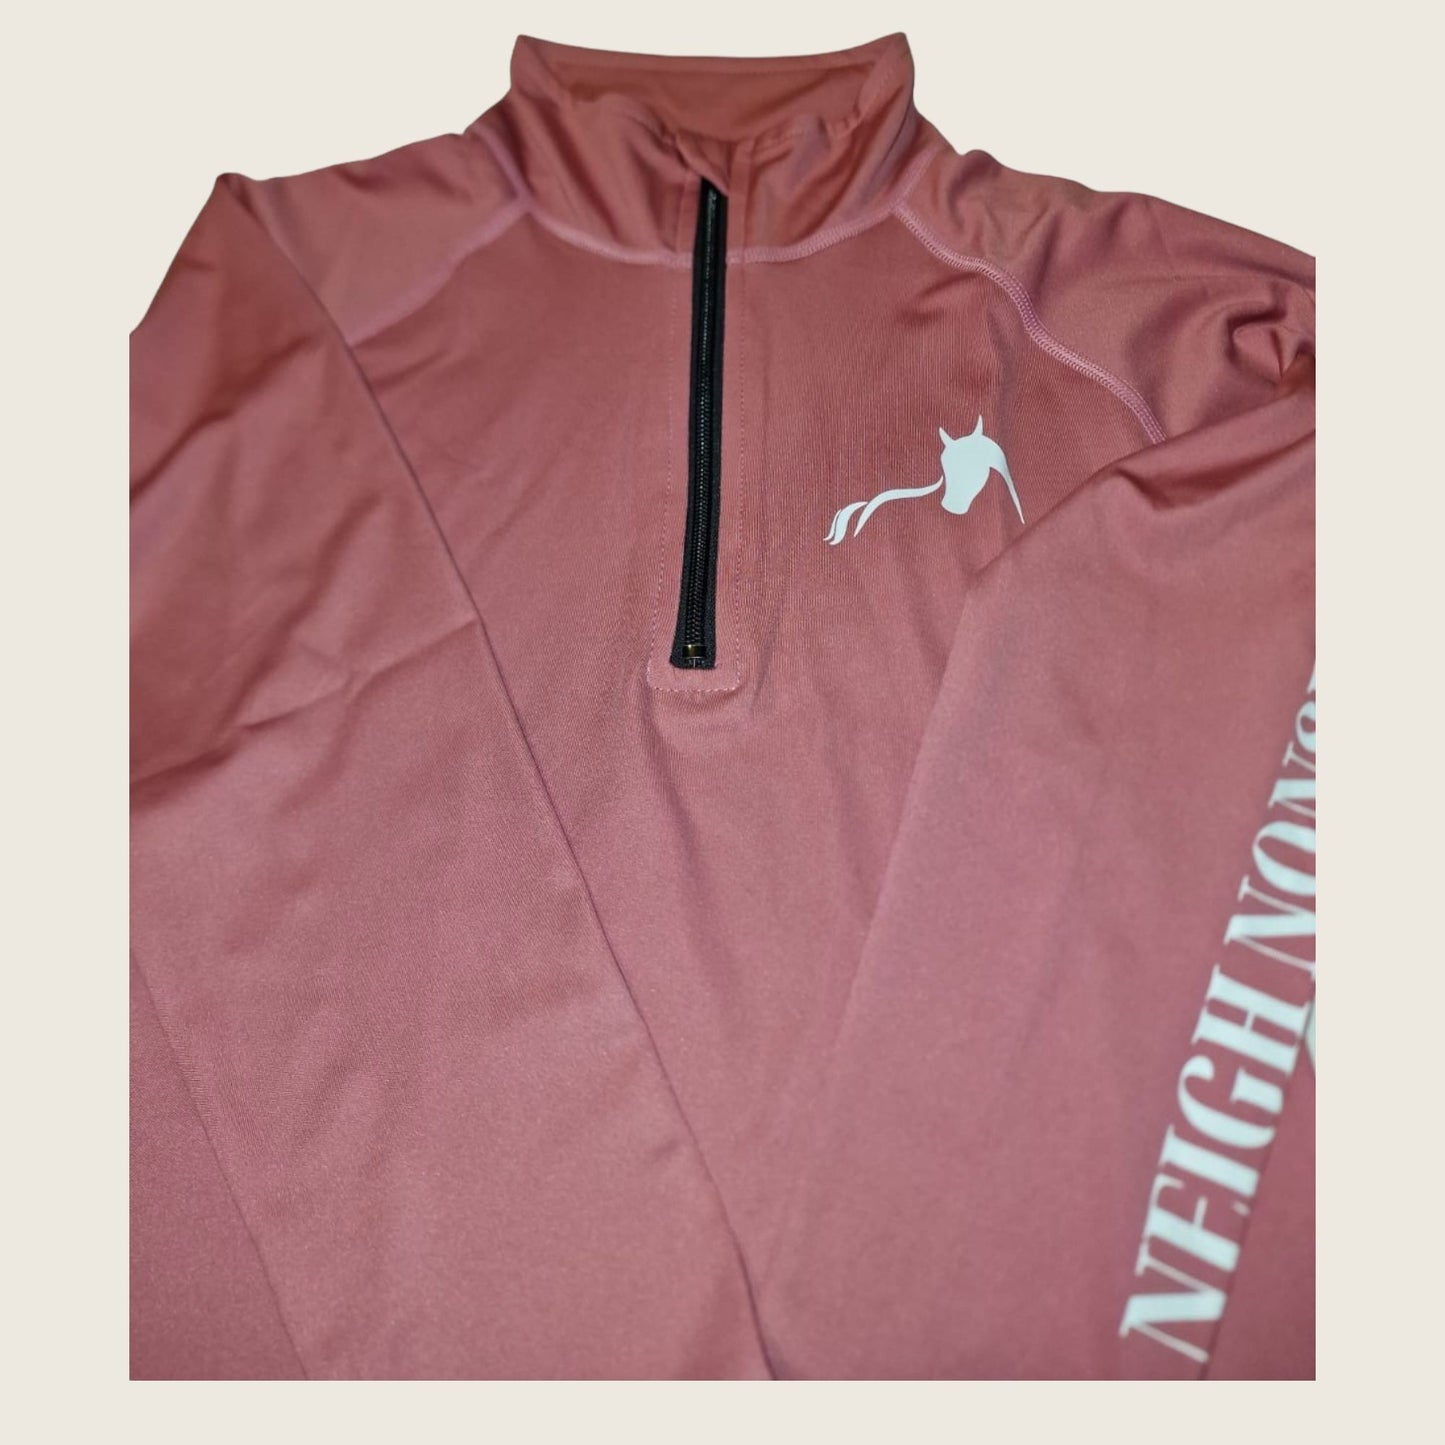 PINK LONG SLEEVED BASE LAYERS – NEIGH NONSENSE EQUESTRIAN